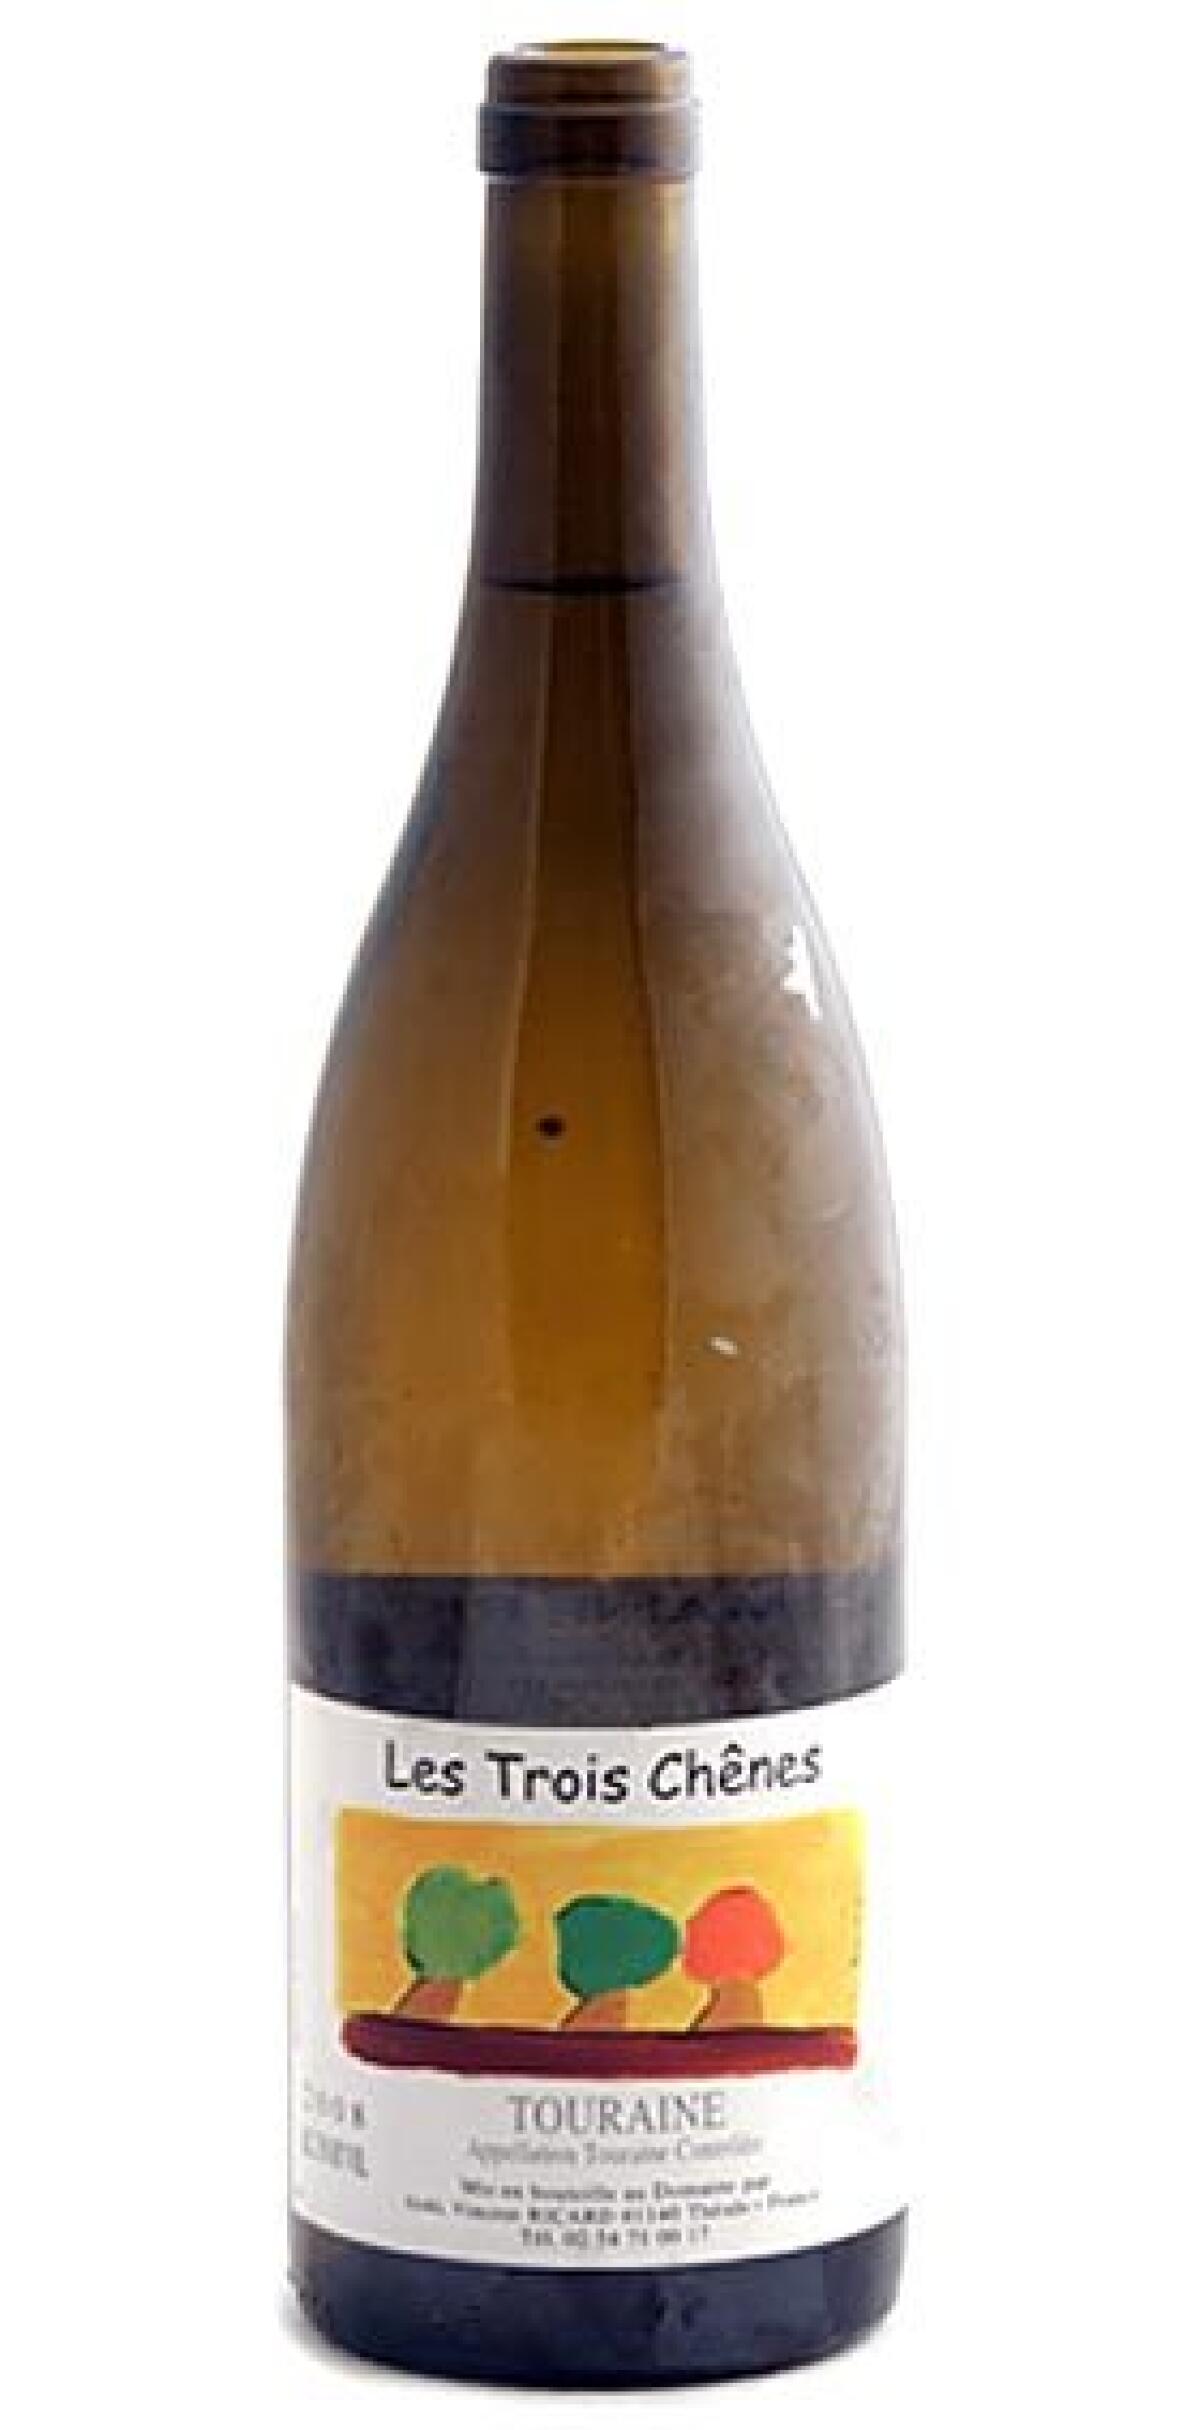 Made from biodynamically grown grapes, the 2008 "Les Trois Chênes" -- the three oaks -- is intense and minerally, with notes of lime zest, tangerine and stone. For the money, it's a great little wine to have on hand for the summer. An outstanding bargain from the Loire Valley. Click here for more: